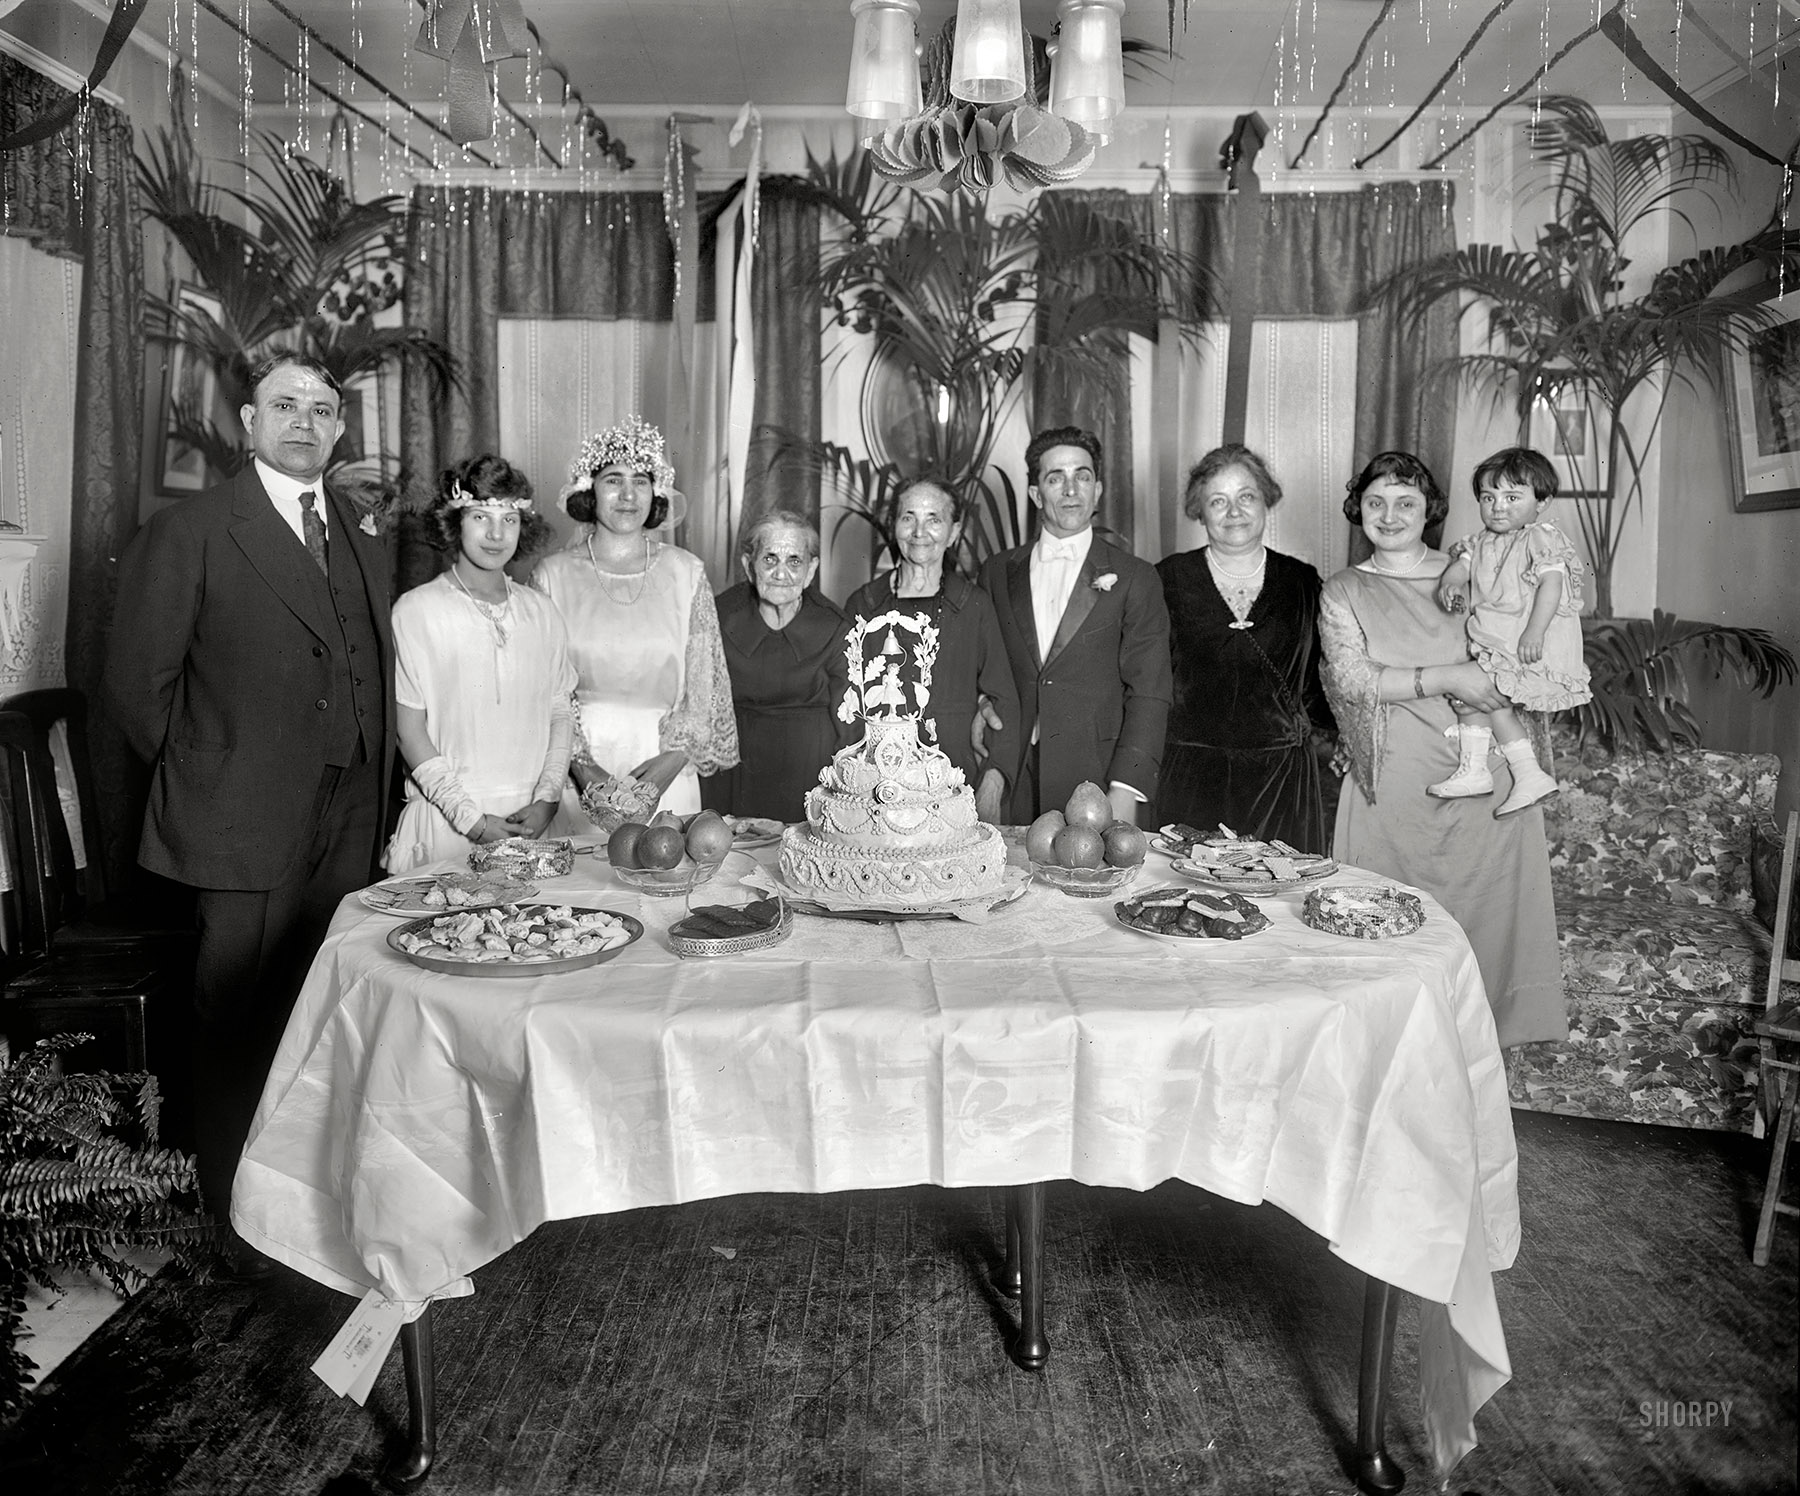 Washington, D.C., circa 1921. "Scalco, National Fruit Co." Salvatore Scalco, the groom and company president, was last seen here three years ago. Now posing with the older generation. National Photo glass negative. View full size.